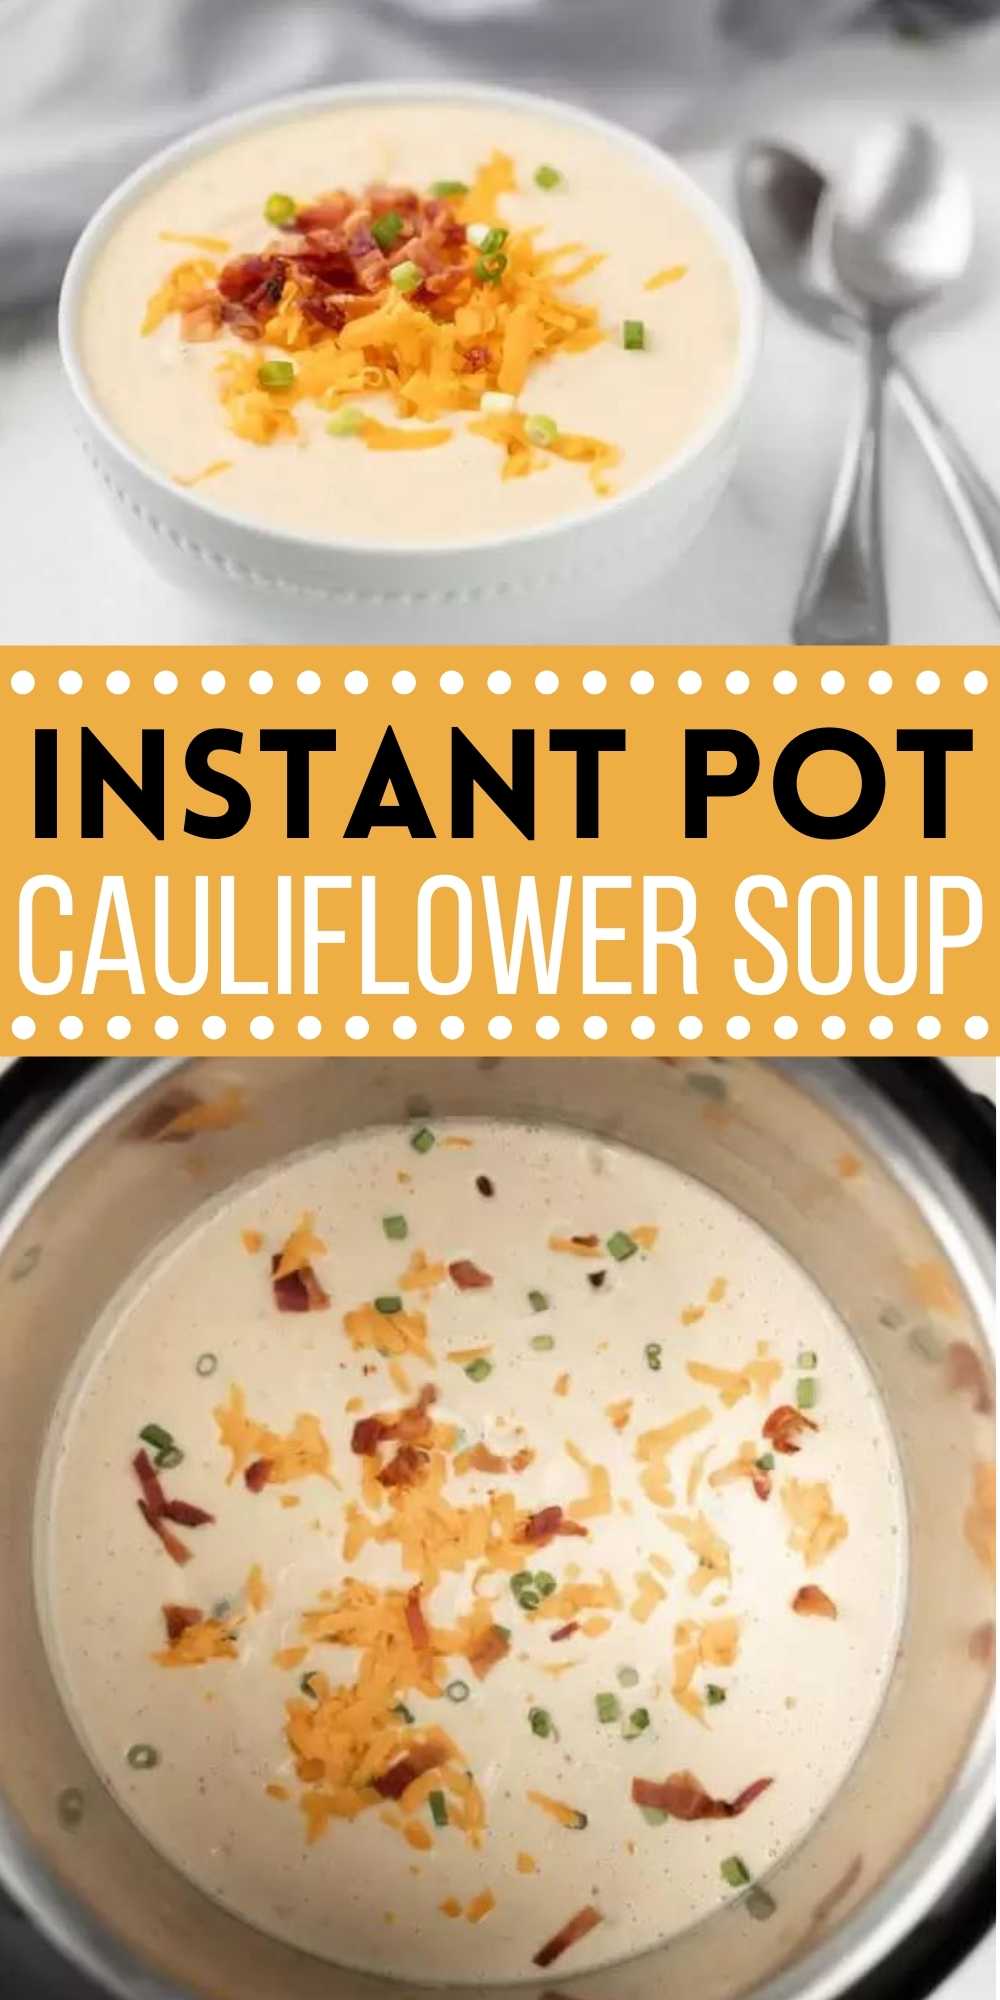 Instant Pot Cauliflower Soup Recipe is creamy and delicious plus keto friendly. Enjoy a warm bowl of soup that tastes like comfort food without guilt. You will love this healthy pressure cooker cauliflower soup recipe.  #eatingonadime #instantpotrecipes #souprecipes #ketorecipes 
